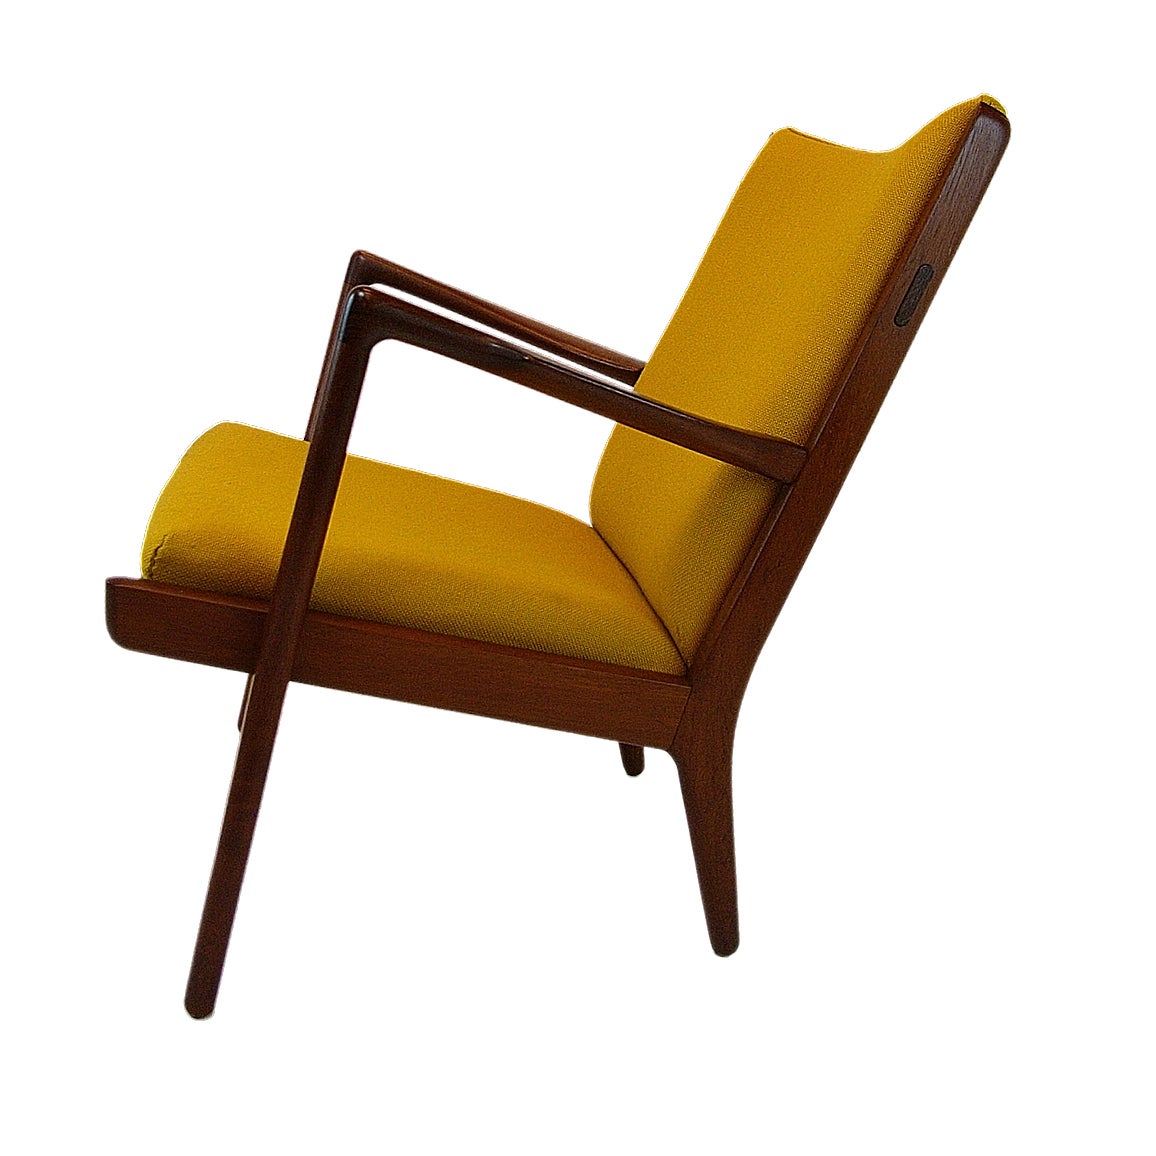 Mid-20th Century Pair of Hans Wegner Teak Lounge Chairs by A.P. Stolen